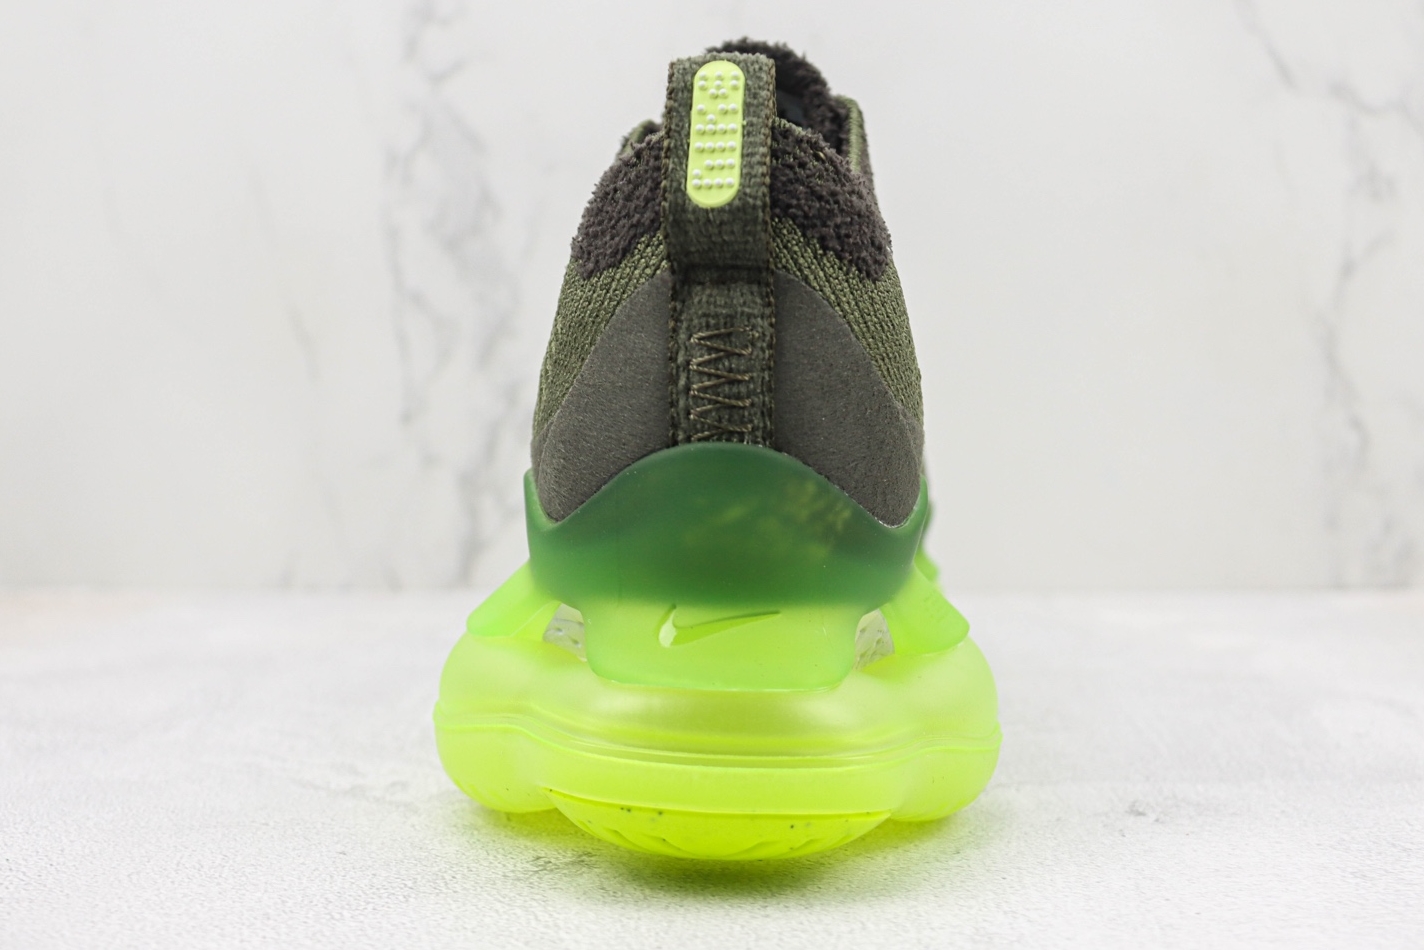 Nike Air Max Scorpion 'Barely Volt' DJ4701-300 - Buy Online at Competitive Prices!